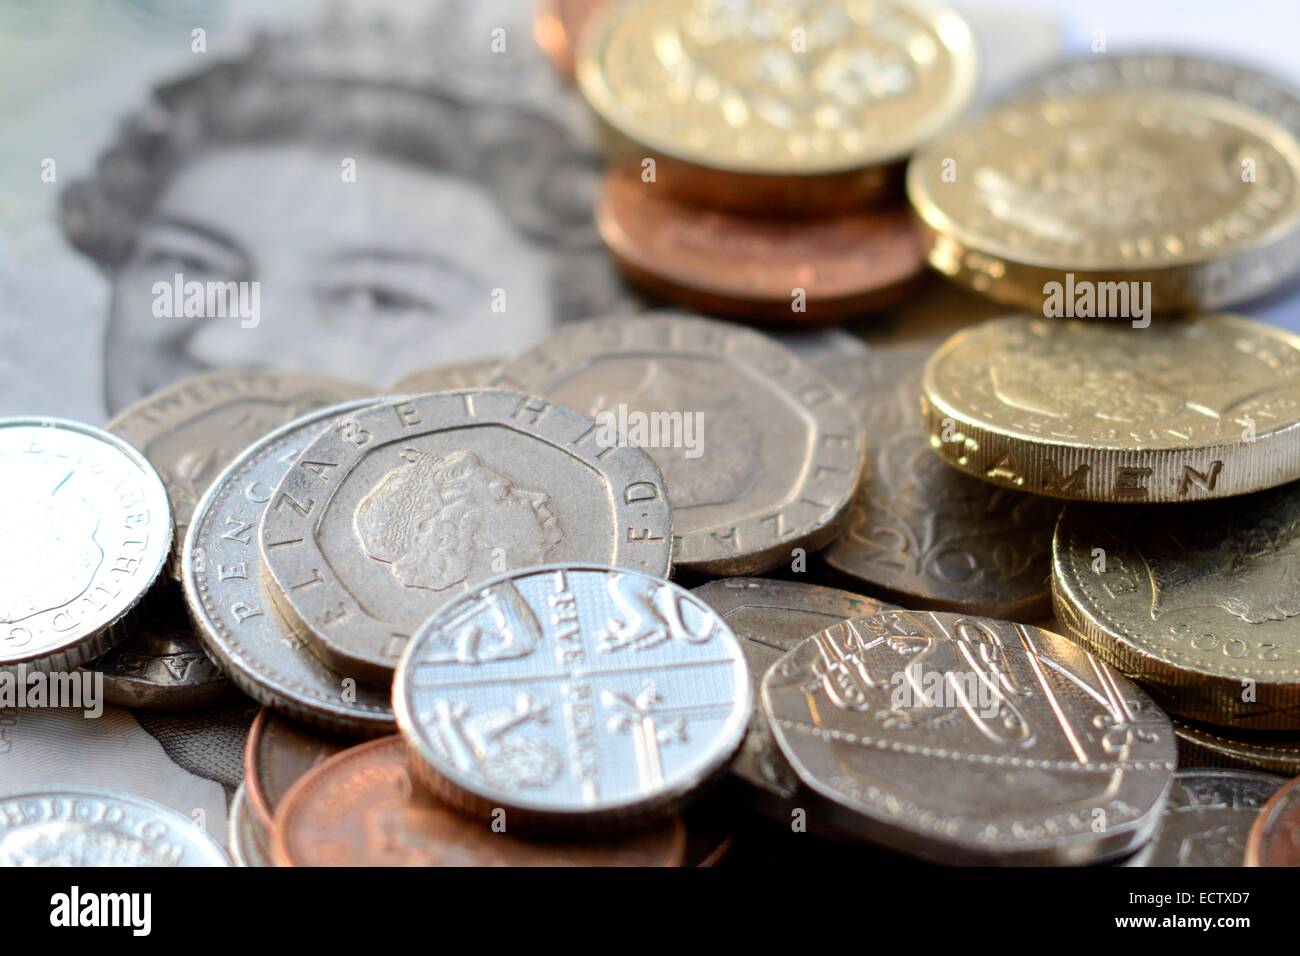 British Sterling money coins and notes Stock Photo